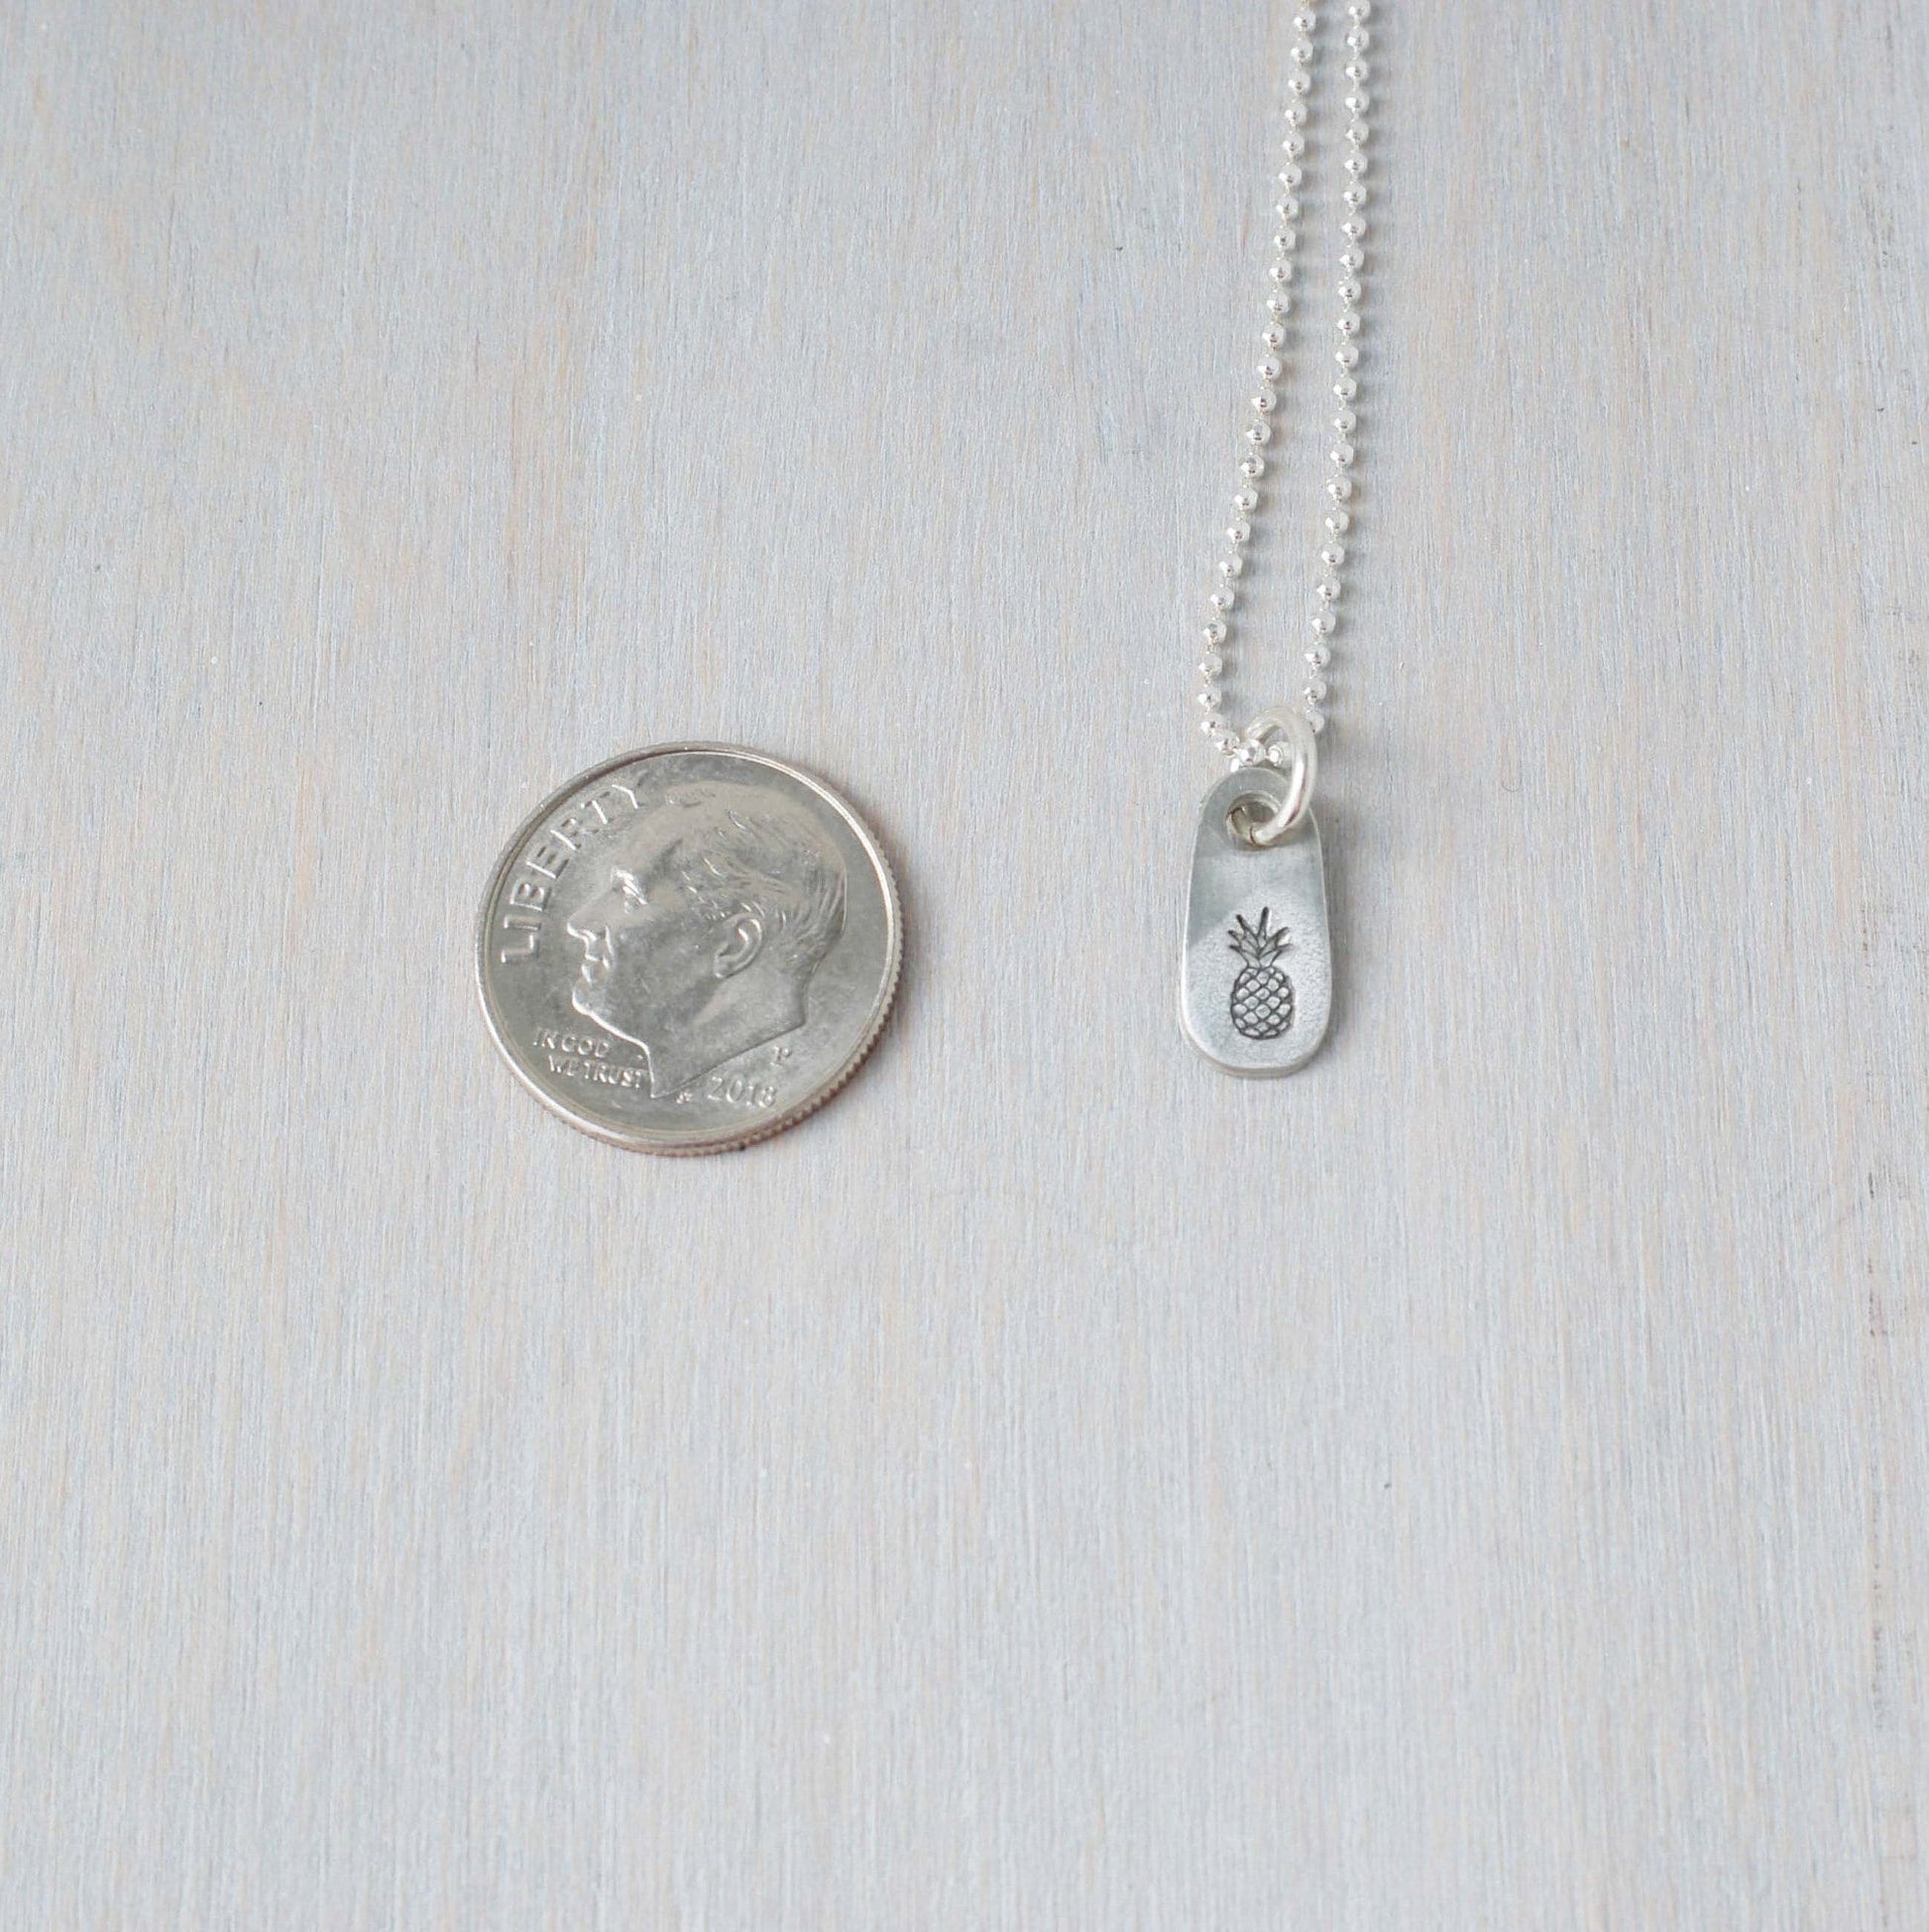 Dainty silver Pineapple necklace in artisan pewter next to a dime